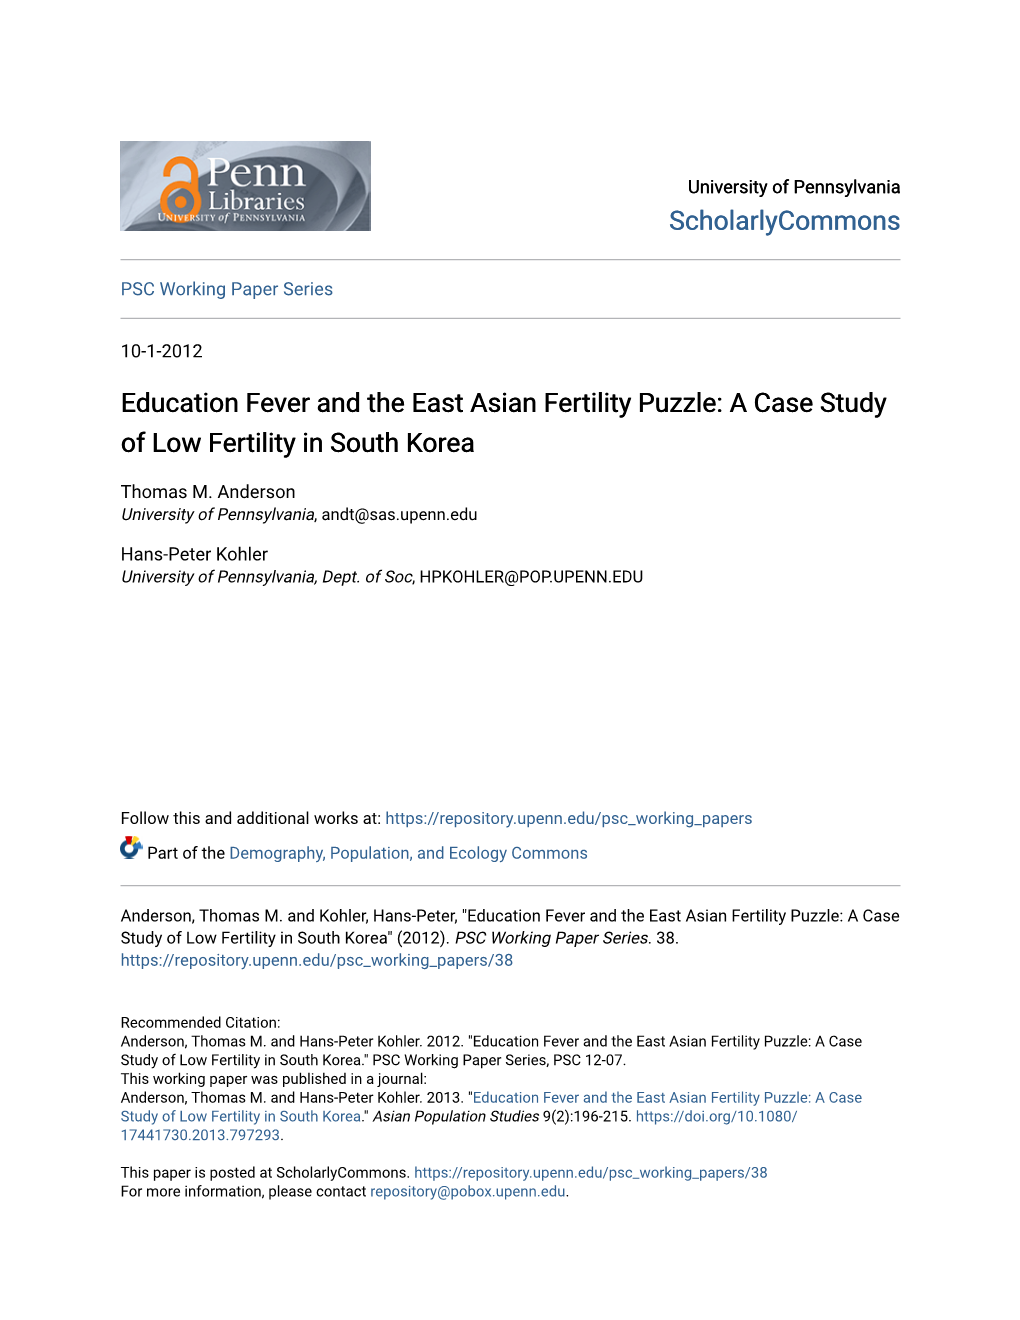 Education Fever and the East Asian Fertility Puzzle: a Case Study of Low Fertility in South Korea